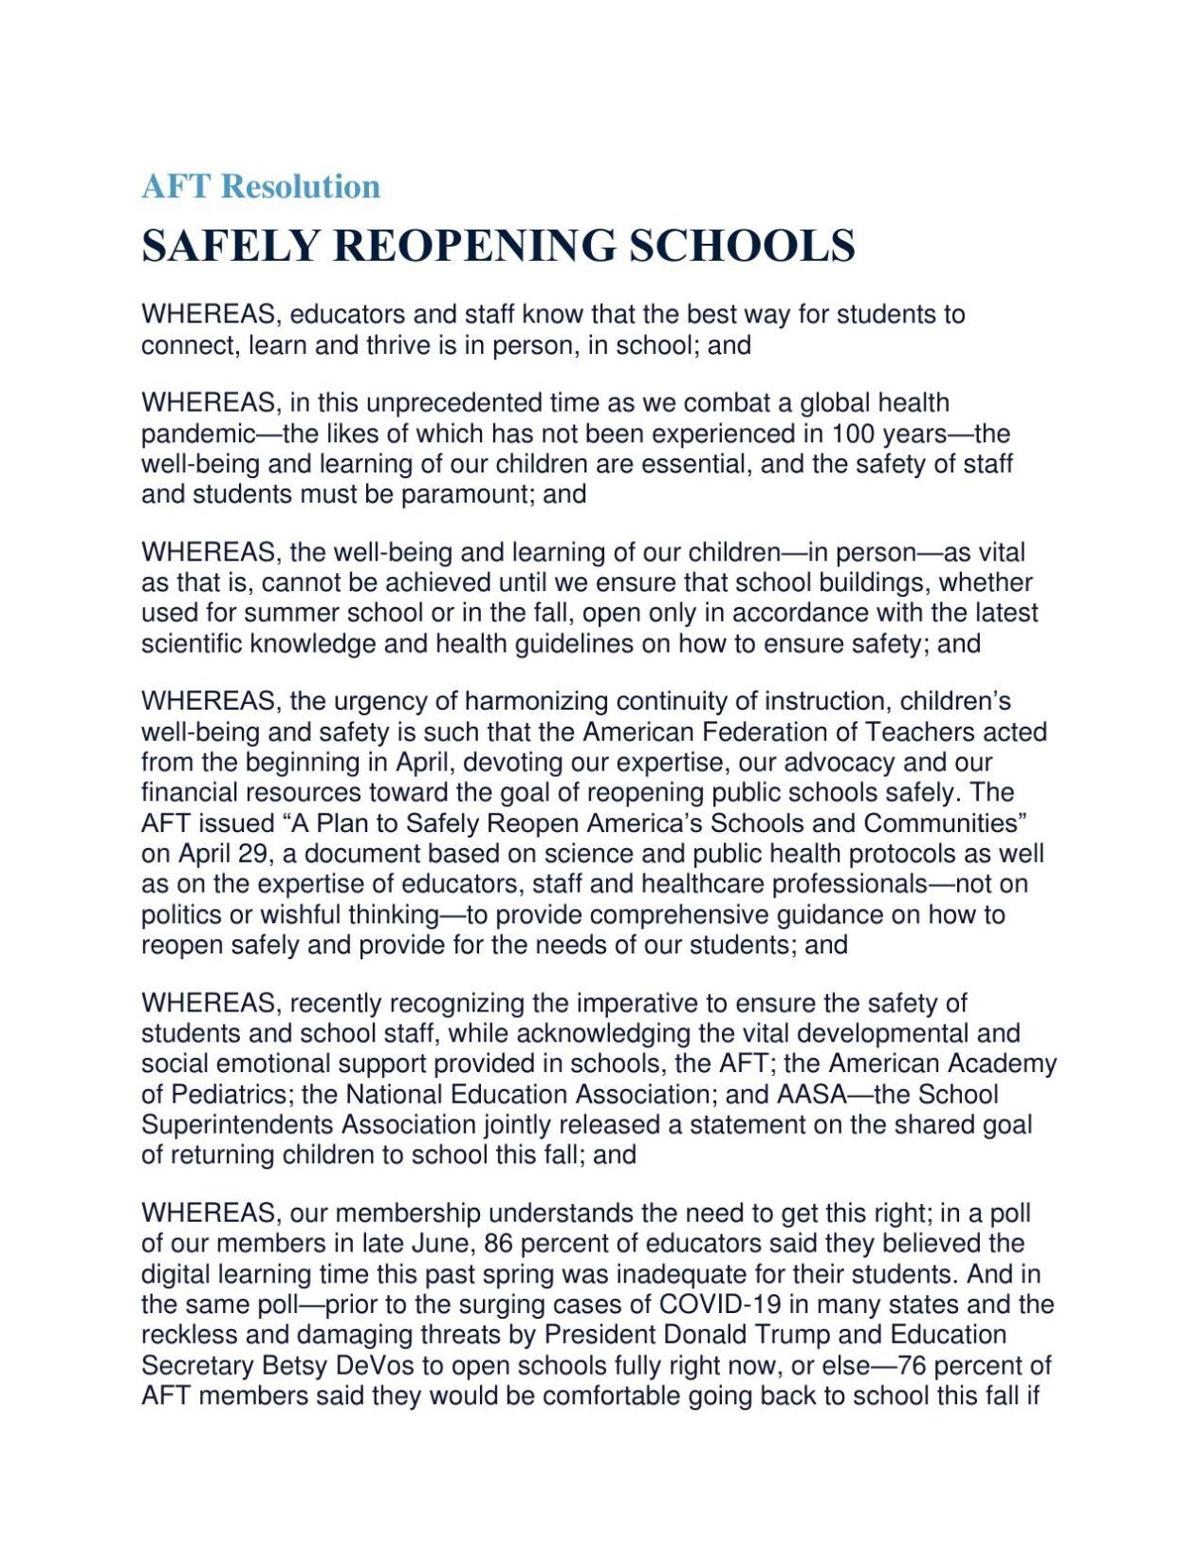 AFT Resolution on Safe School Reopening